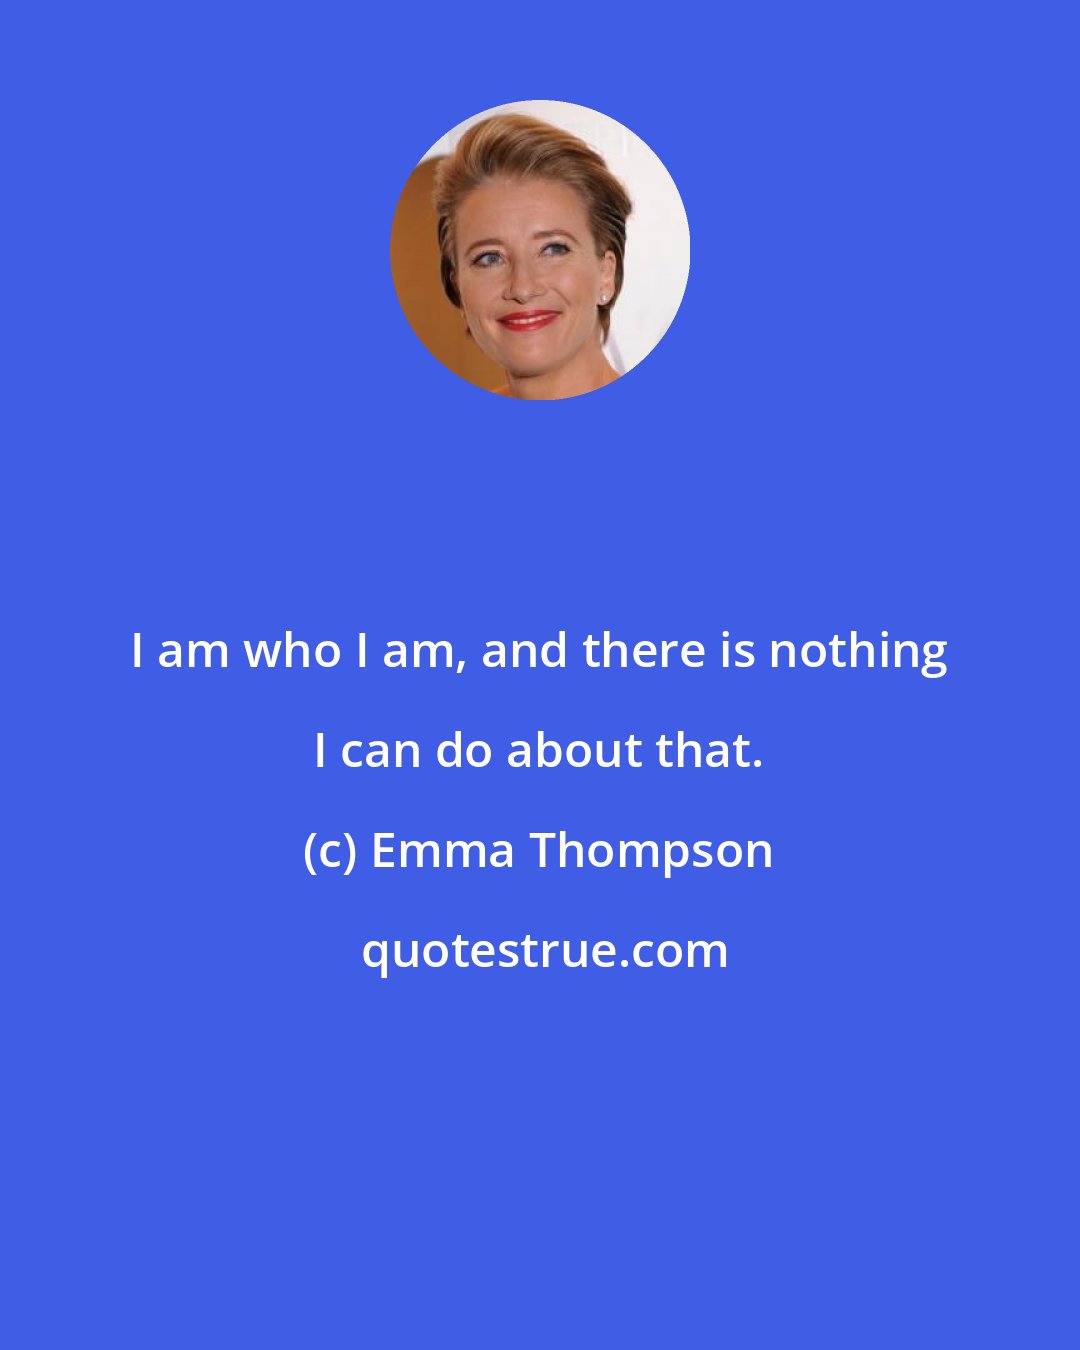 Emma Thompson: I am who I am, and there is nothing I can do about that.